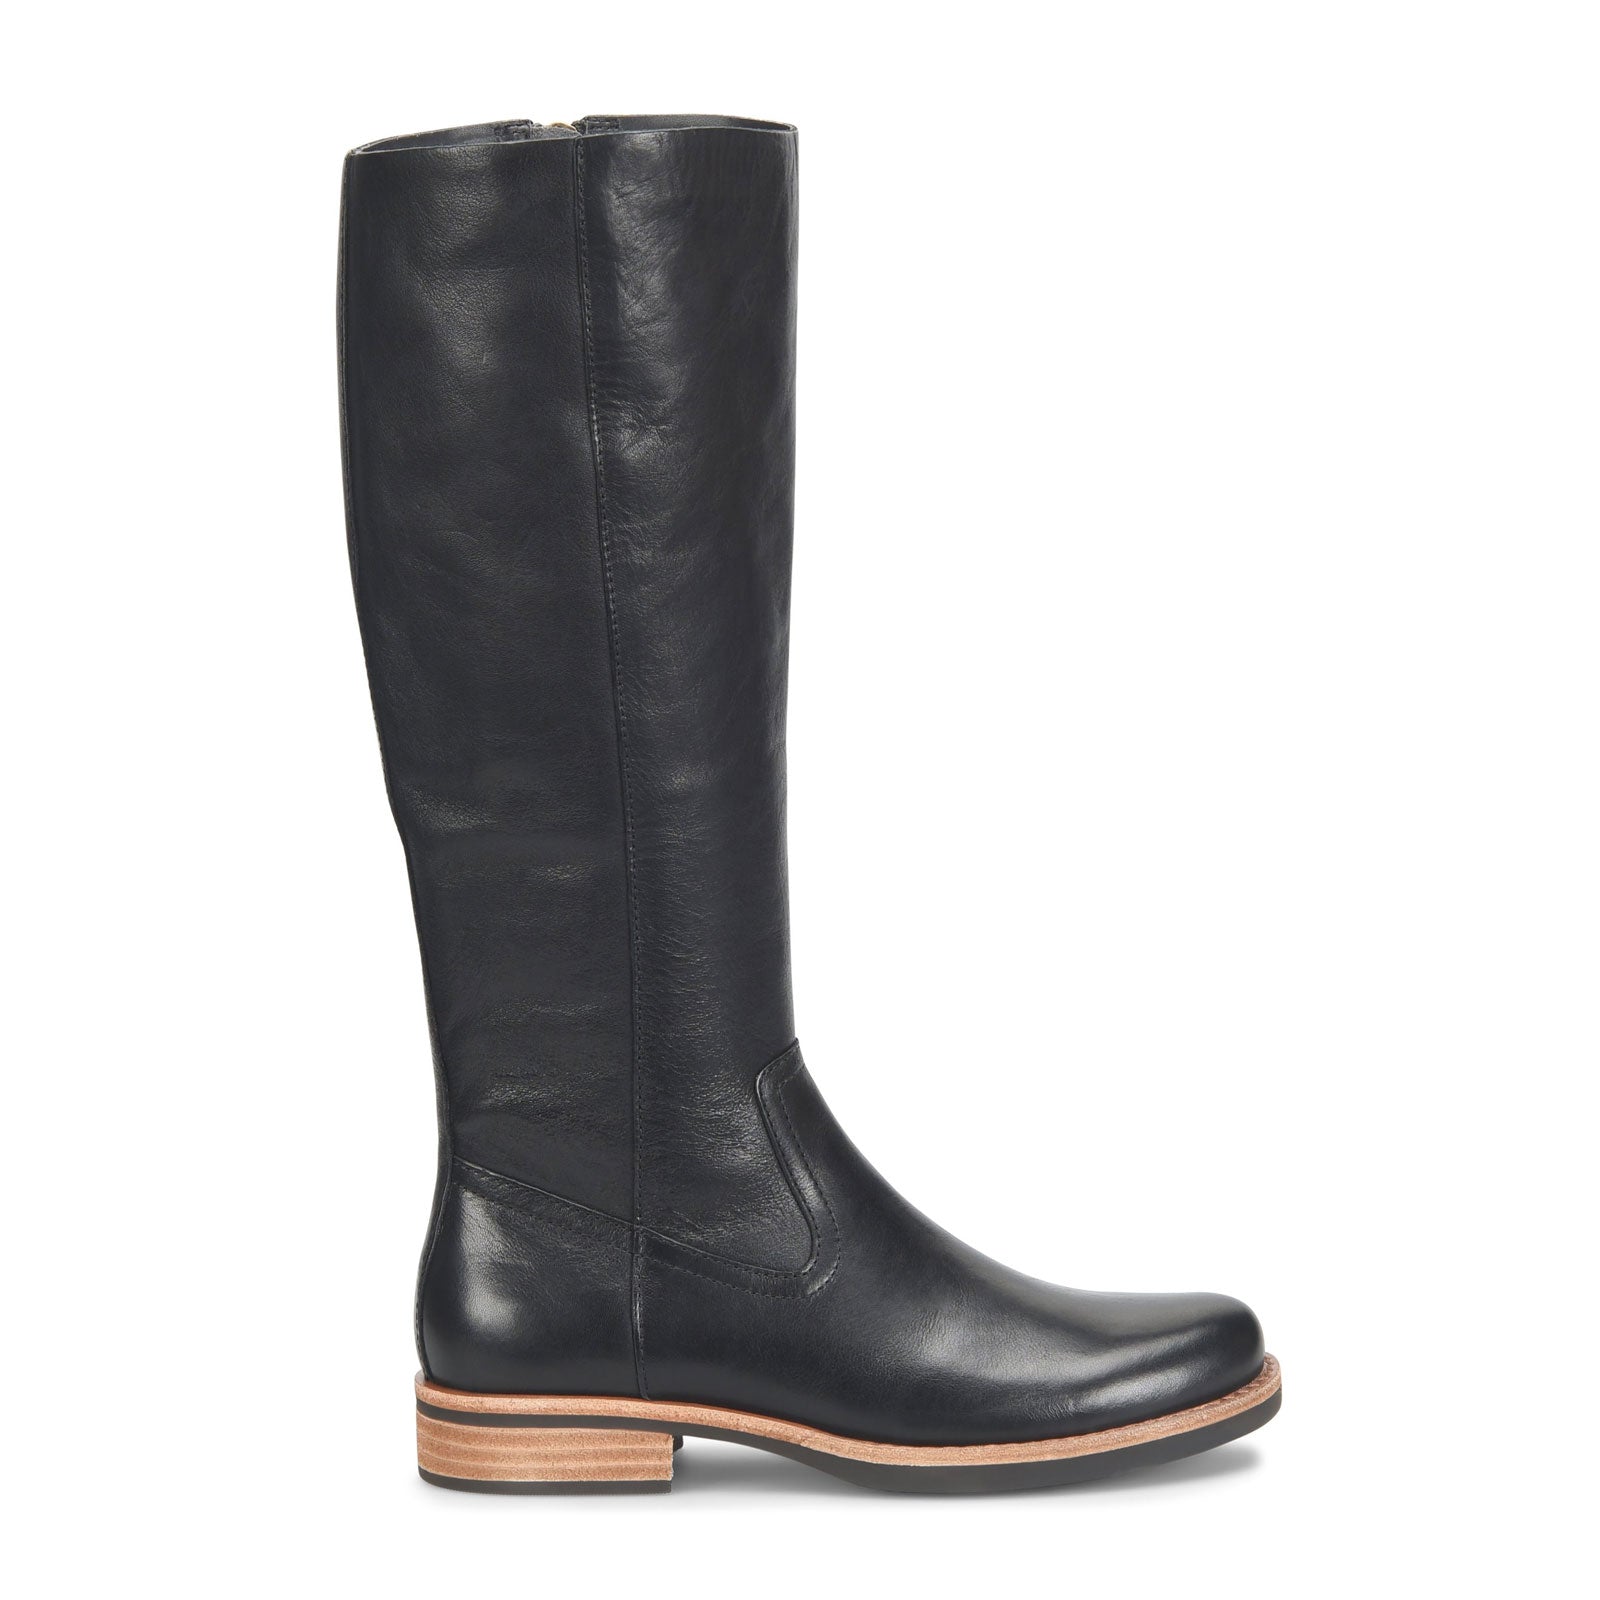 A.F. Vandevorst black tall classic riding boots with low heel (38.5) - V A  N II T A S